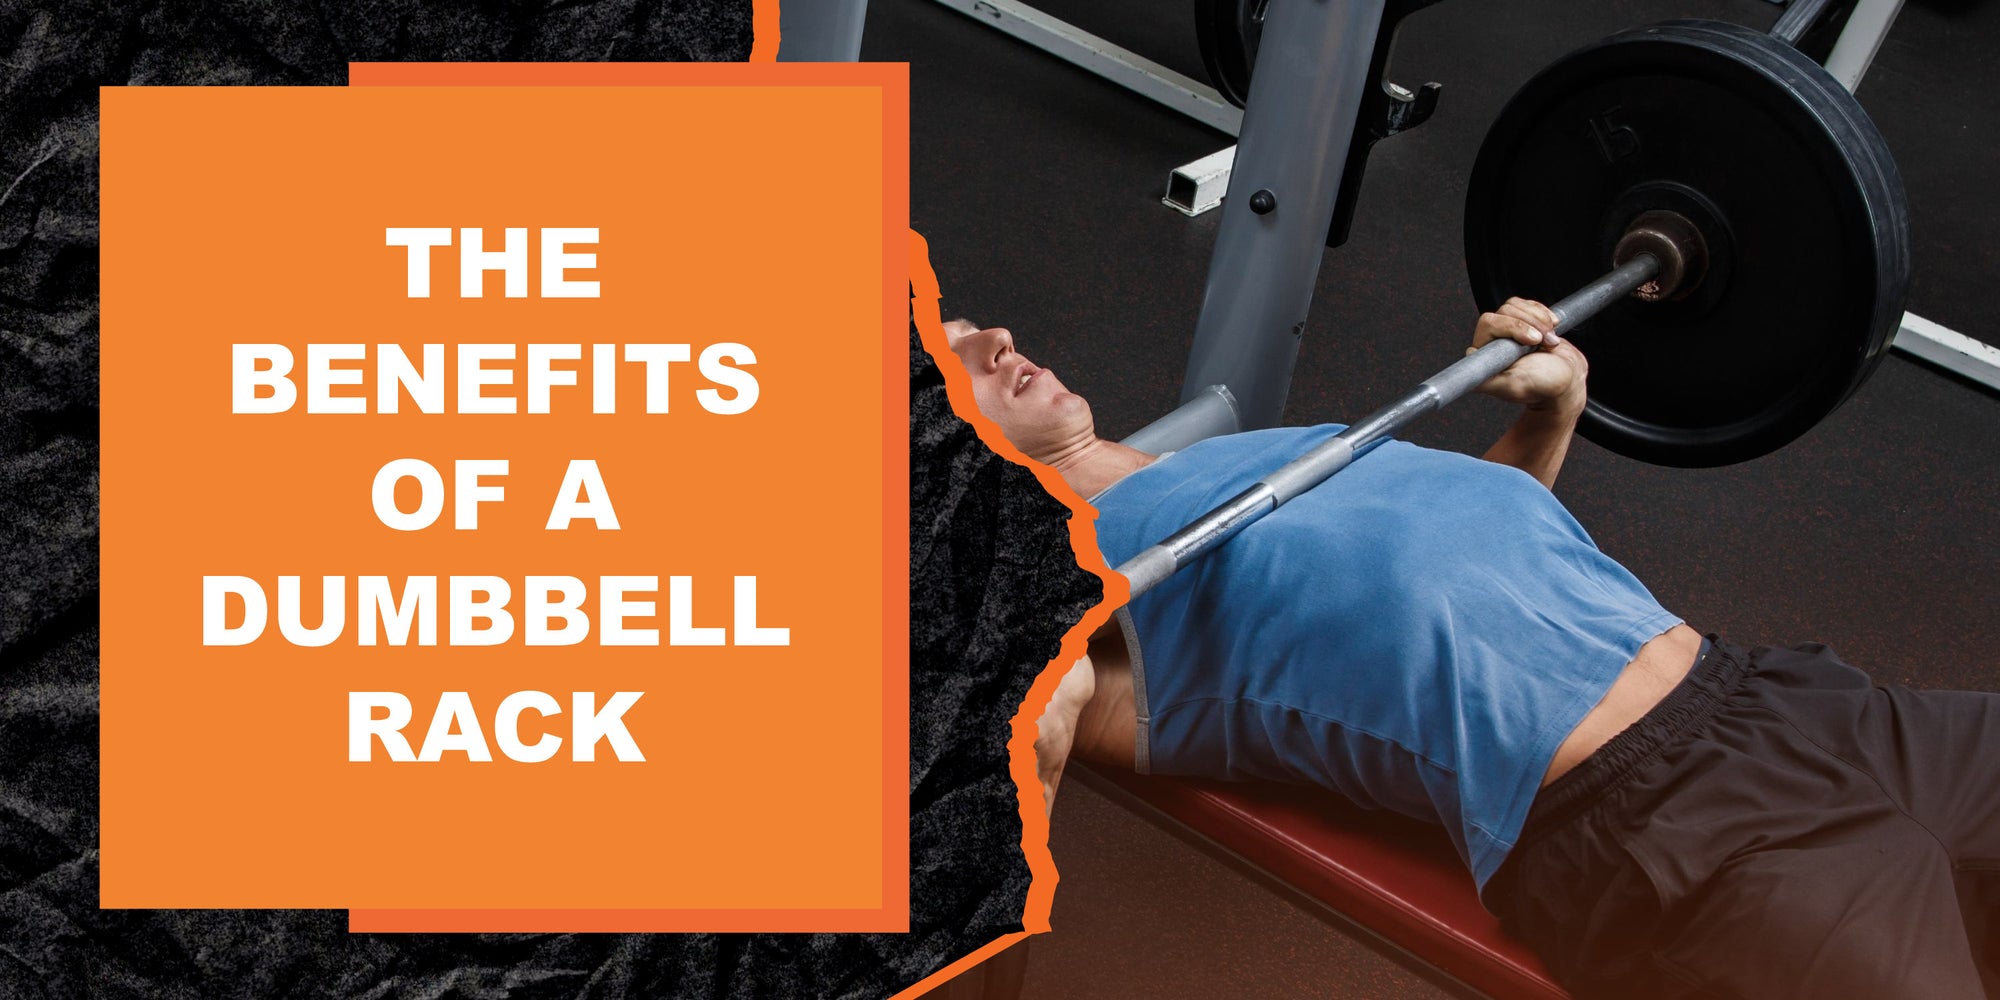 The Benefits of a Dumbbell Rack